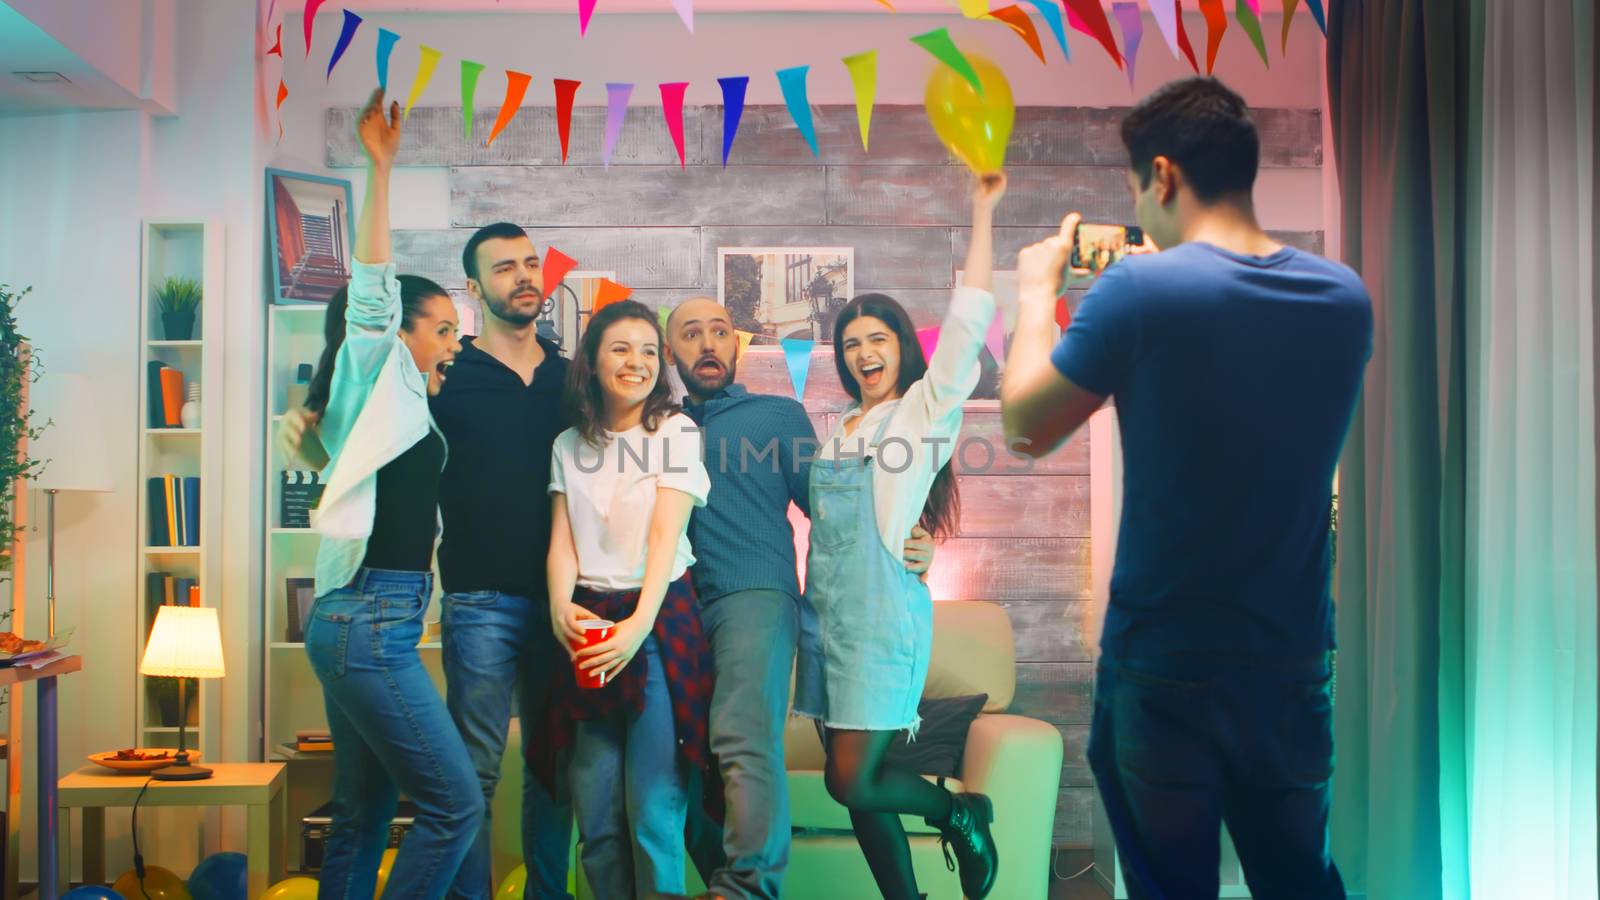 Beautiful young woman blowing kisses surrounded by friends while man taking group photos at the party with smartphone.